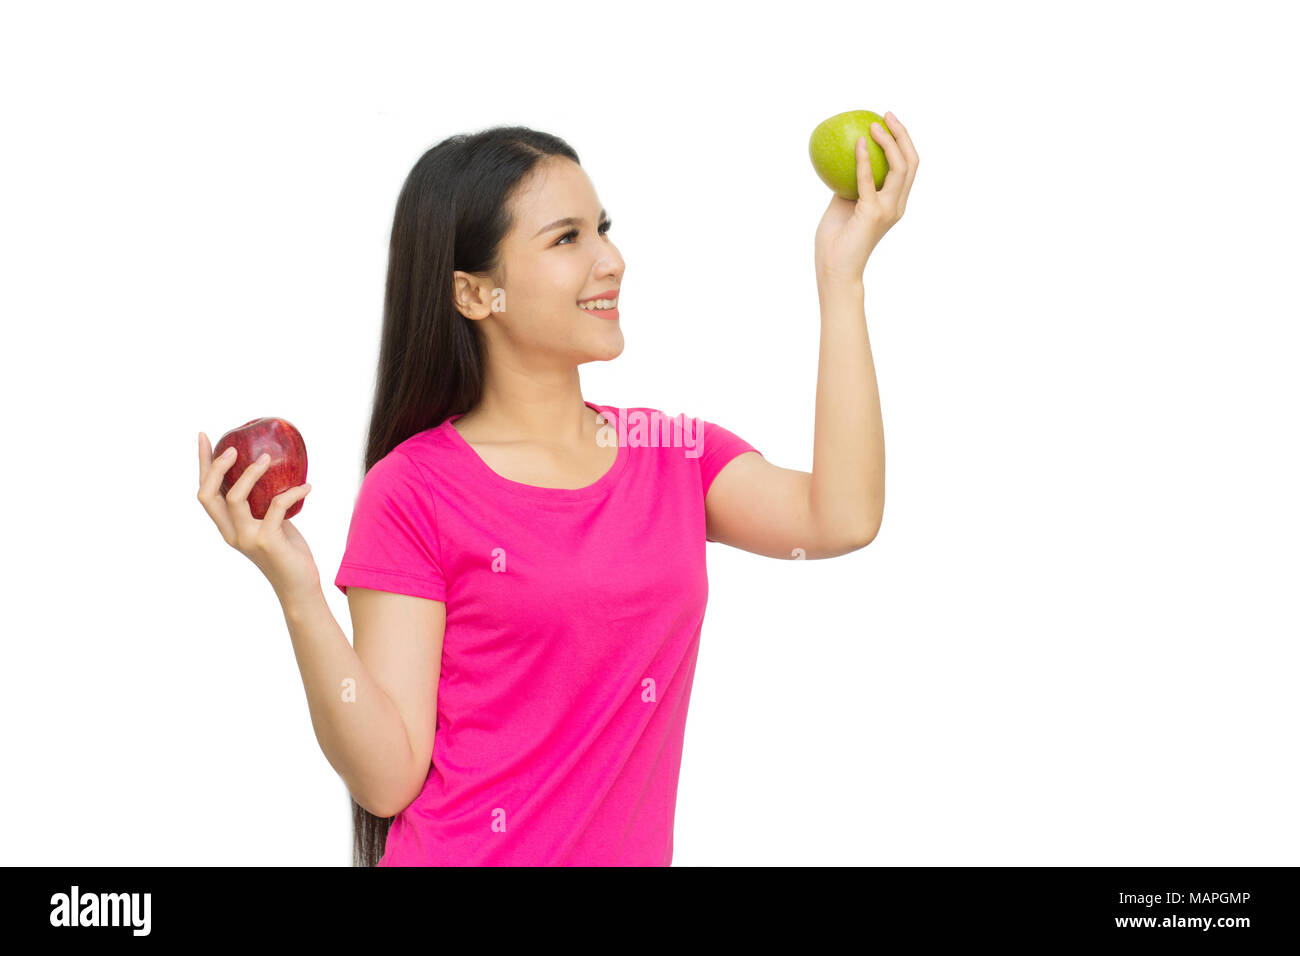 Health girl show red and green apple with smile face isolated on white background, healthy eating food concept Stock Photo